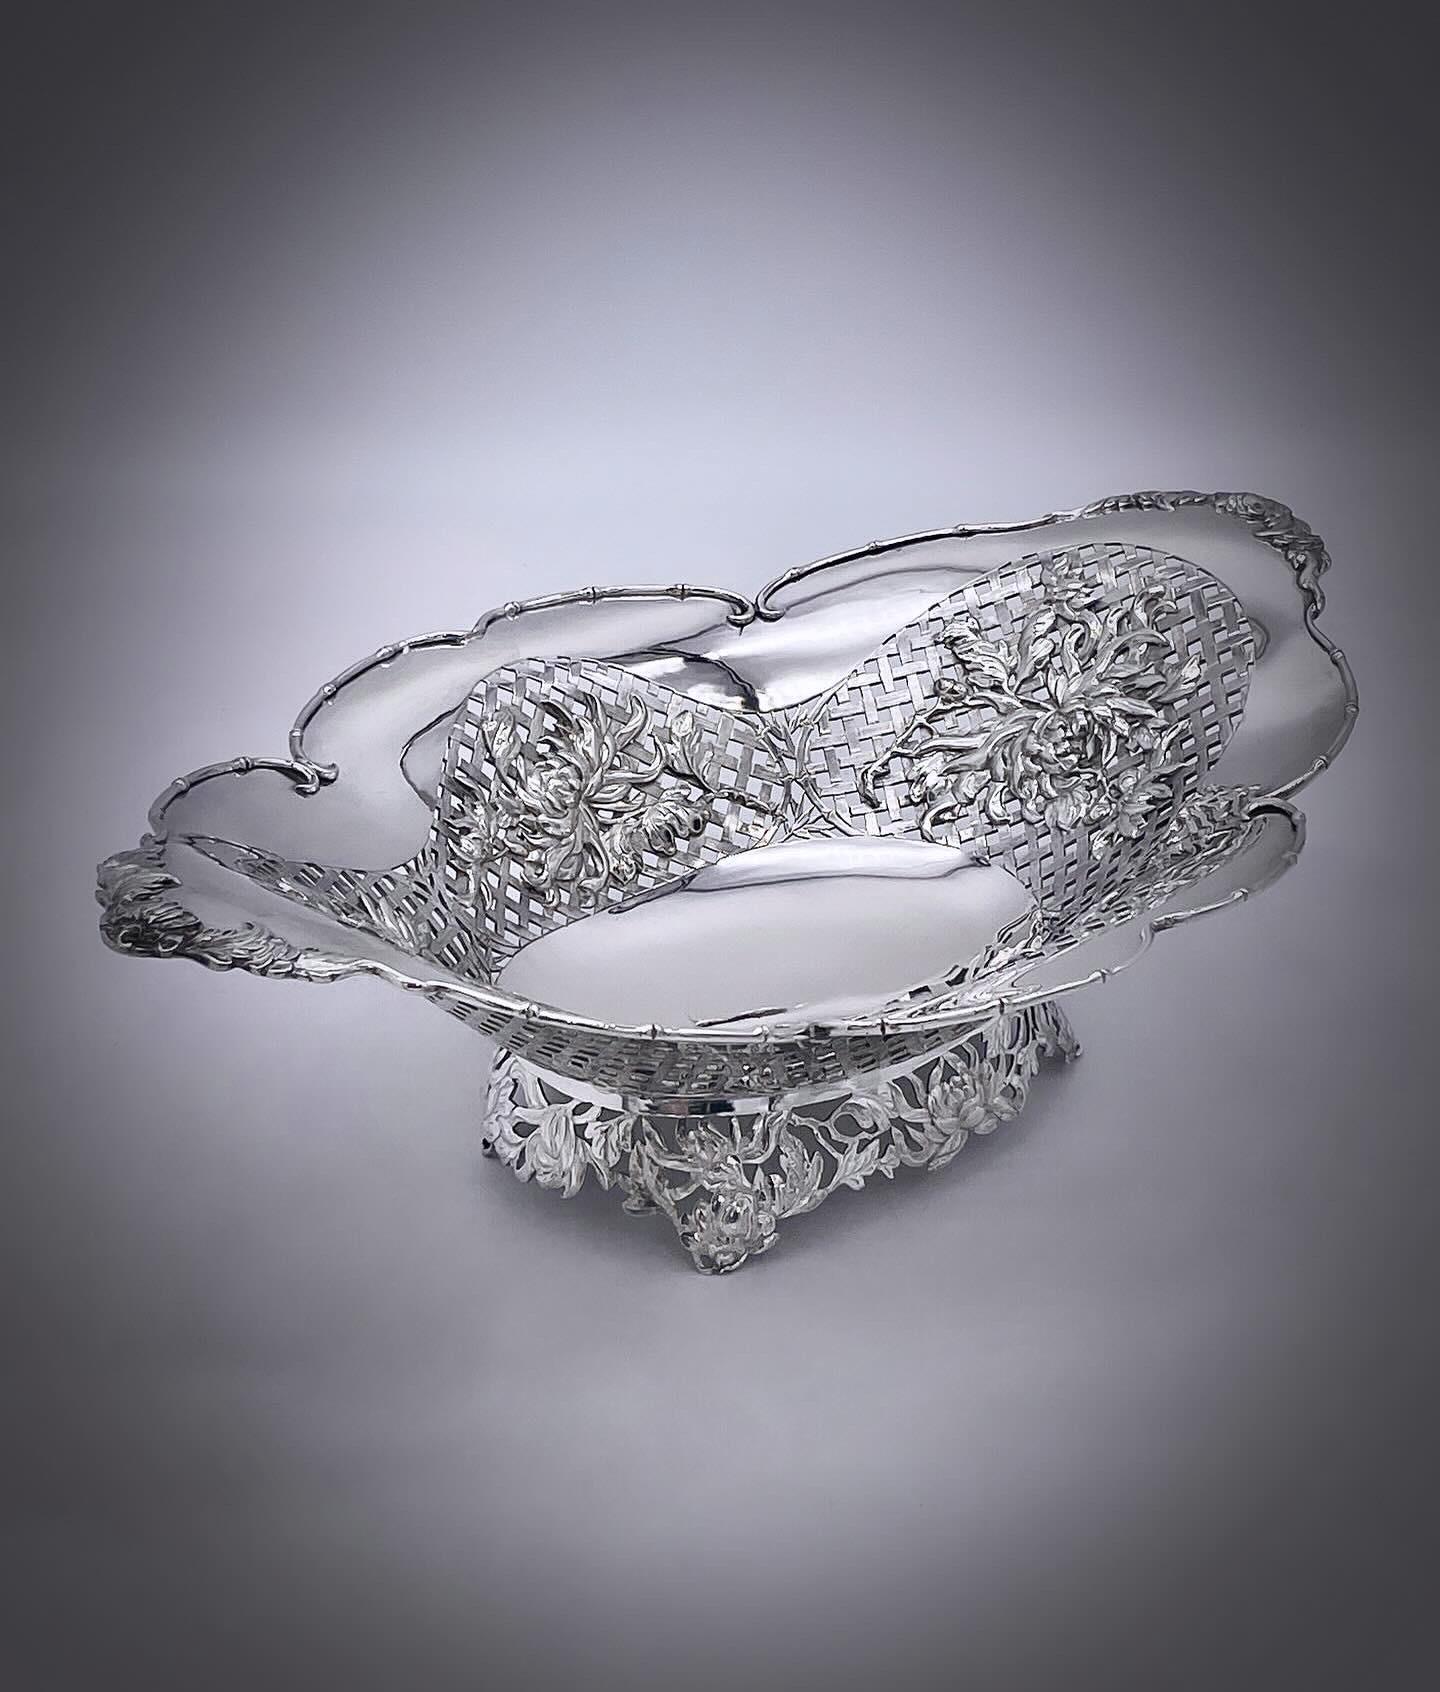 A Chinese export silver fruit dish of shaped oval form. The dish has applied chrysanthemum on engraved basket weave piercing, and the base is a skirt of pierced chrysanthemum. Made by Jing Xiang 敬祥 for the Shanghai firm of Luen Wo, circa 1900.